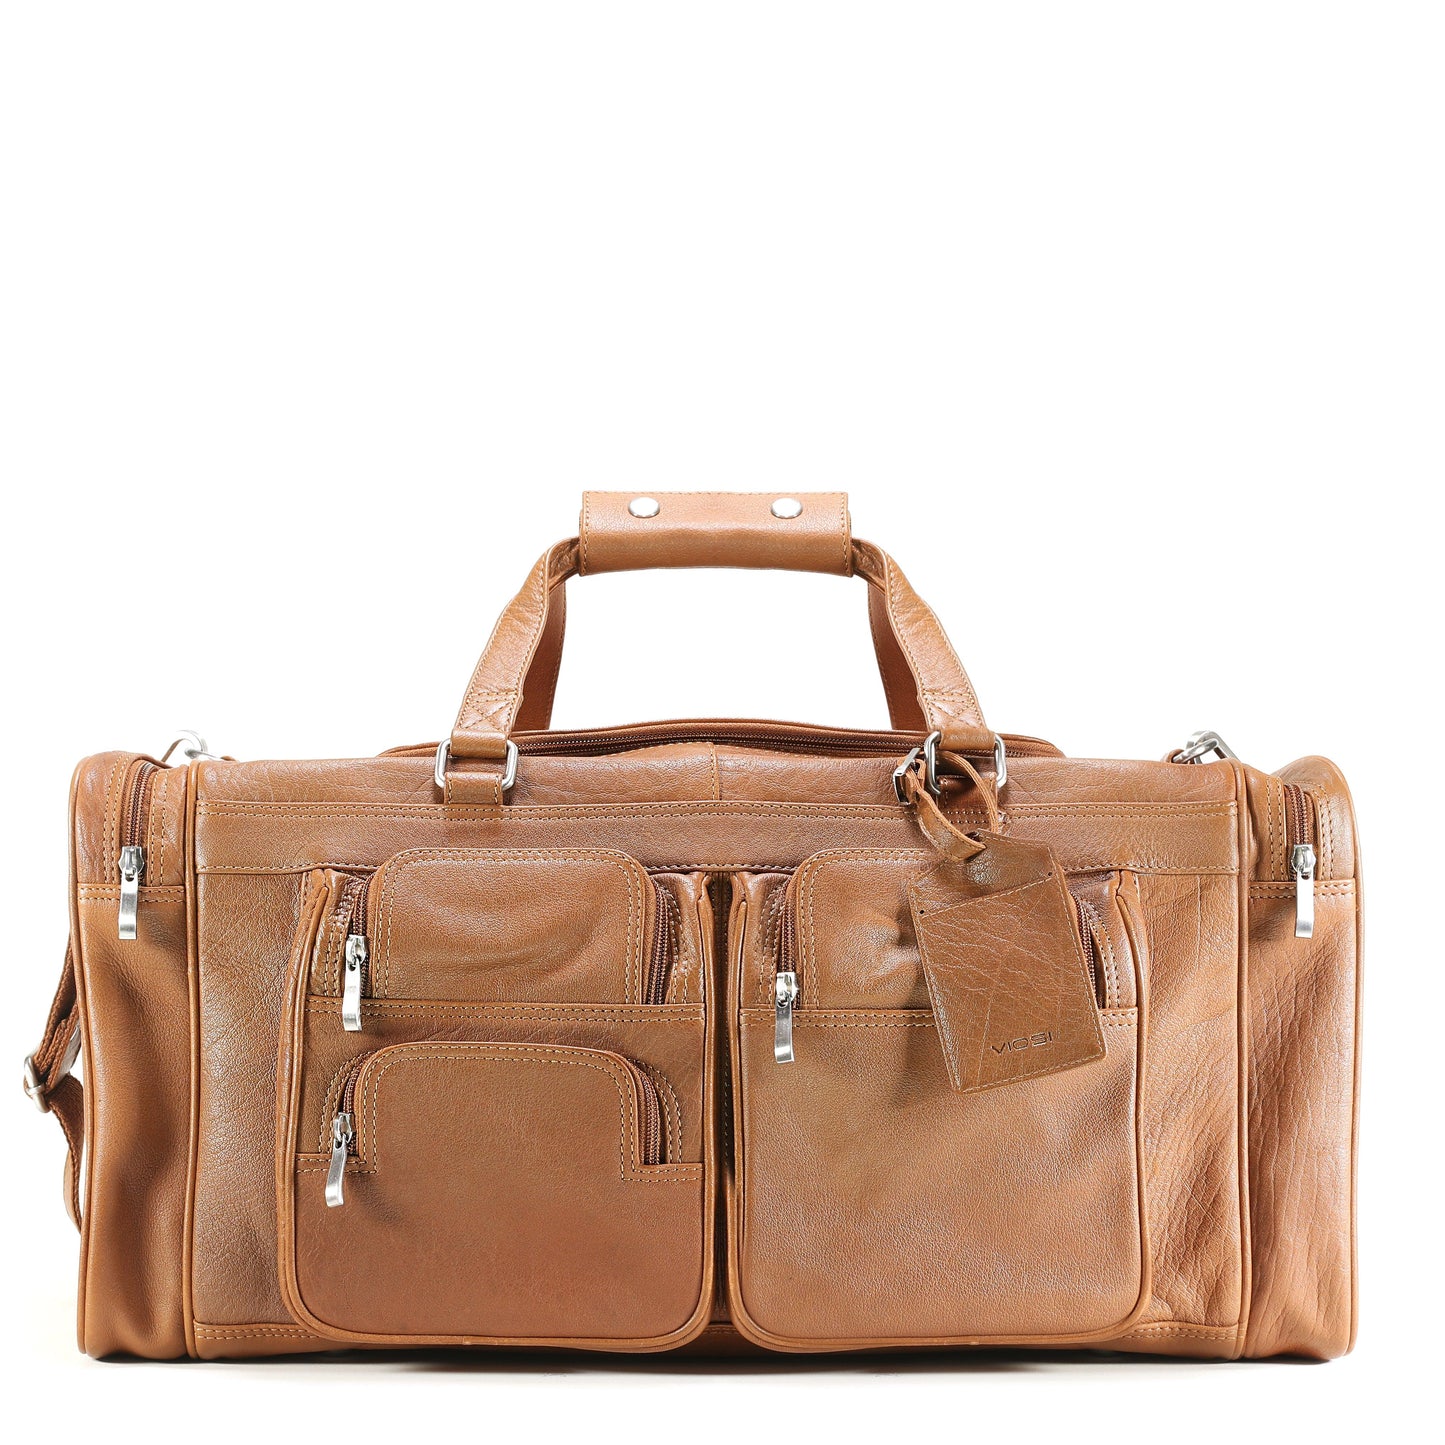 Luggage Bags (4 Styles) - Photography and Web Design - Los Angeles, US based Shopify Experts Revo Designs